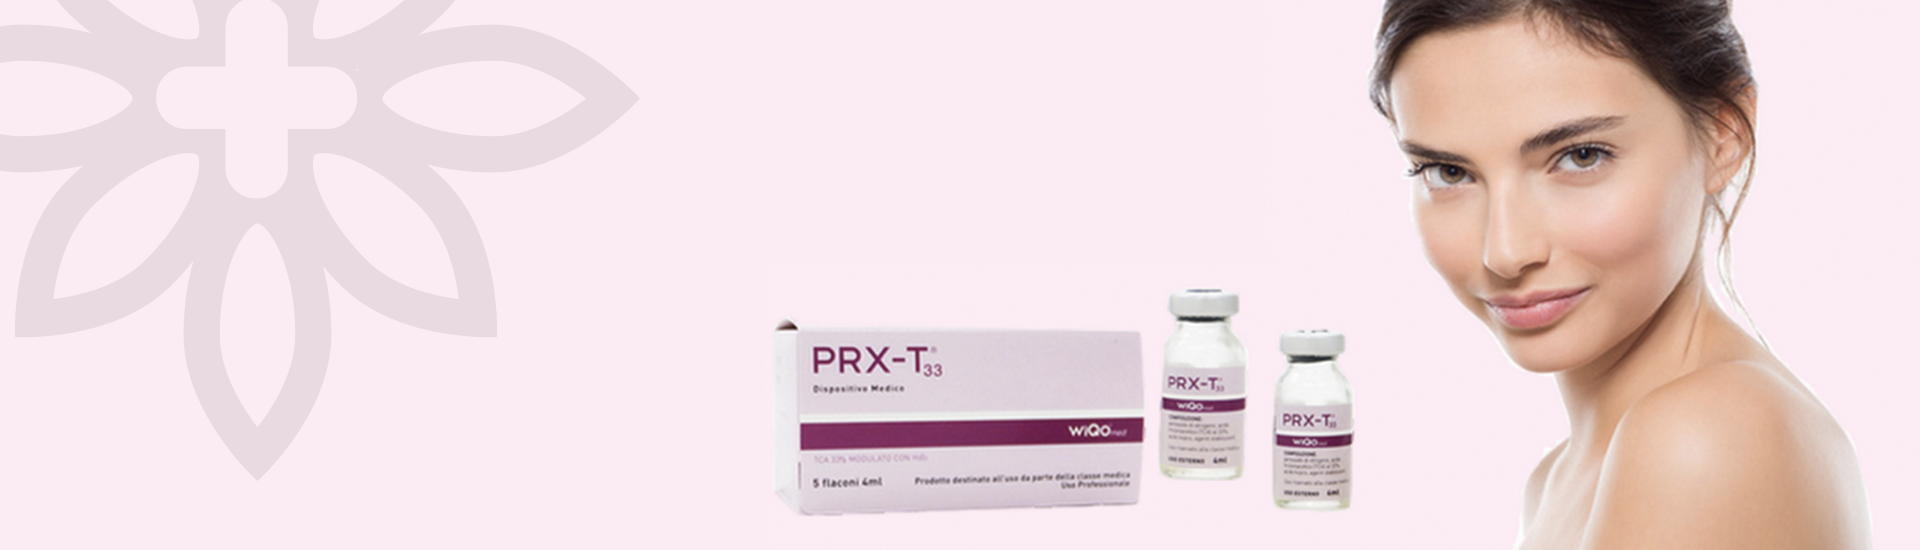 PRX-T®₃₃THERAPY | Lasermed